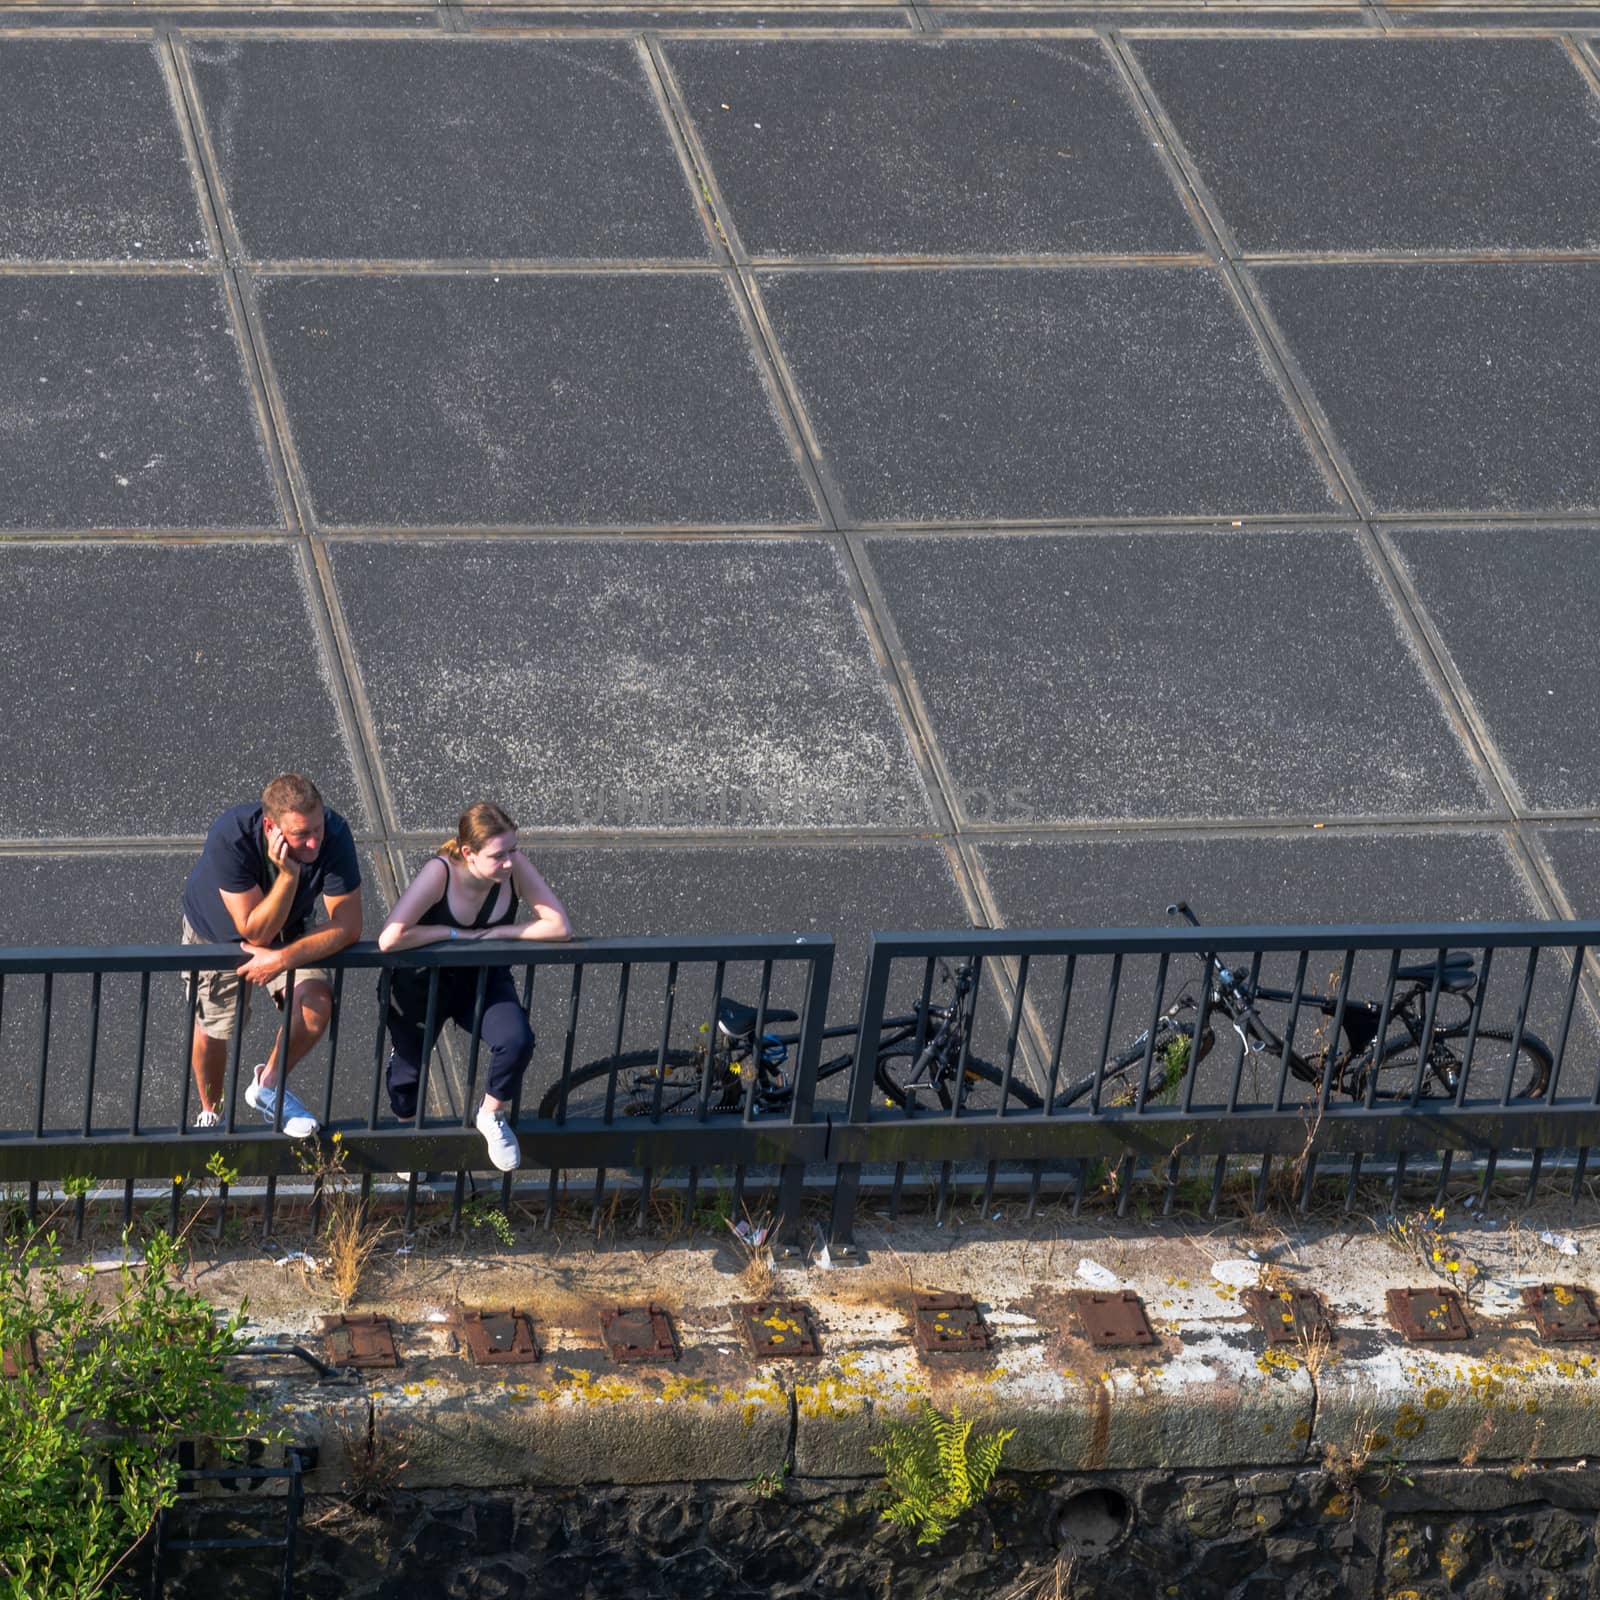 Amsterdam, the Netherlands — July 28, 2019. A photo looking down at a man and a woman leaning on a fence near a pier peering into the distance.